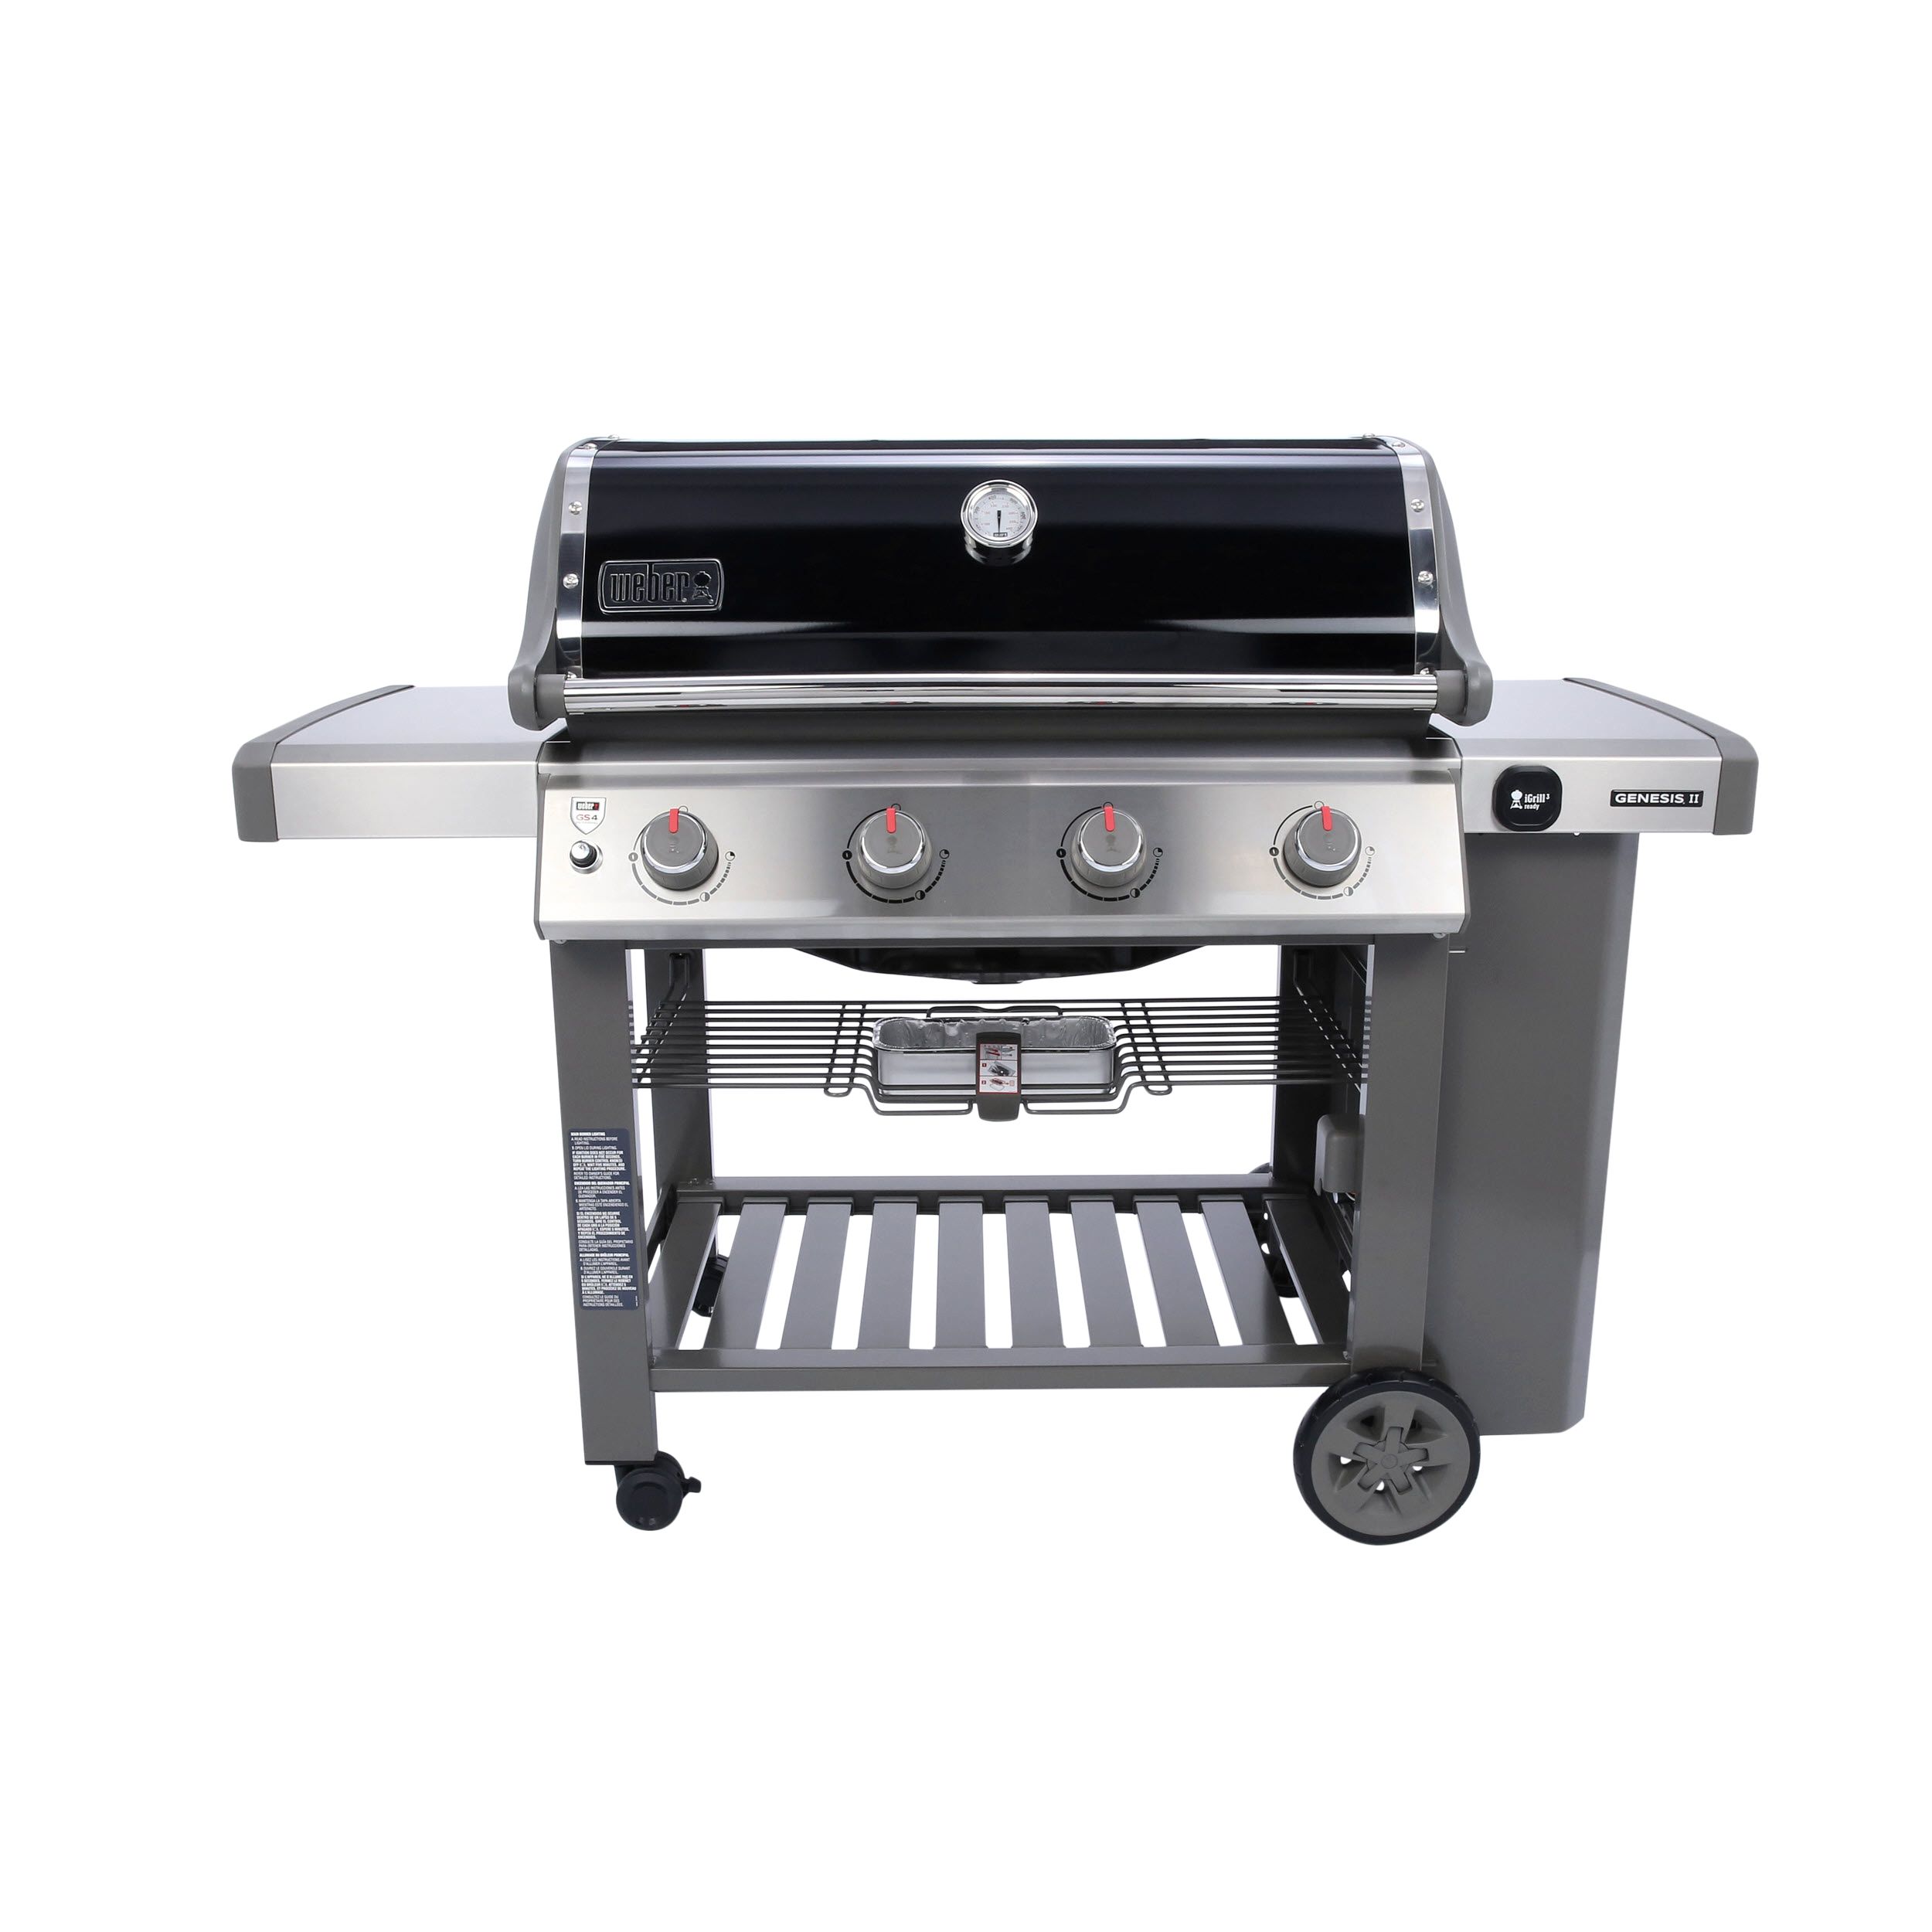 Weber Genesis Ii E 410 Black 4 Burner Liquid Propane Gas Grill In The Gas Grills Department At Lowes Com